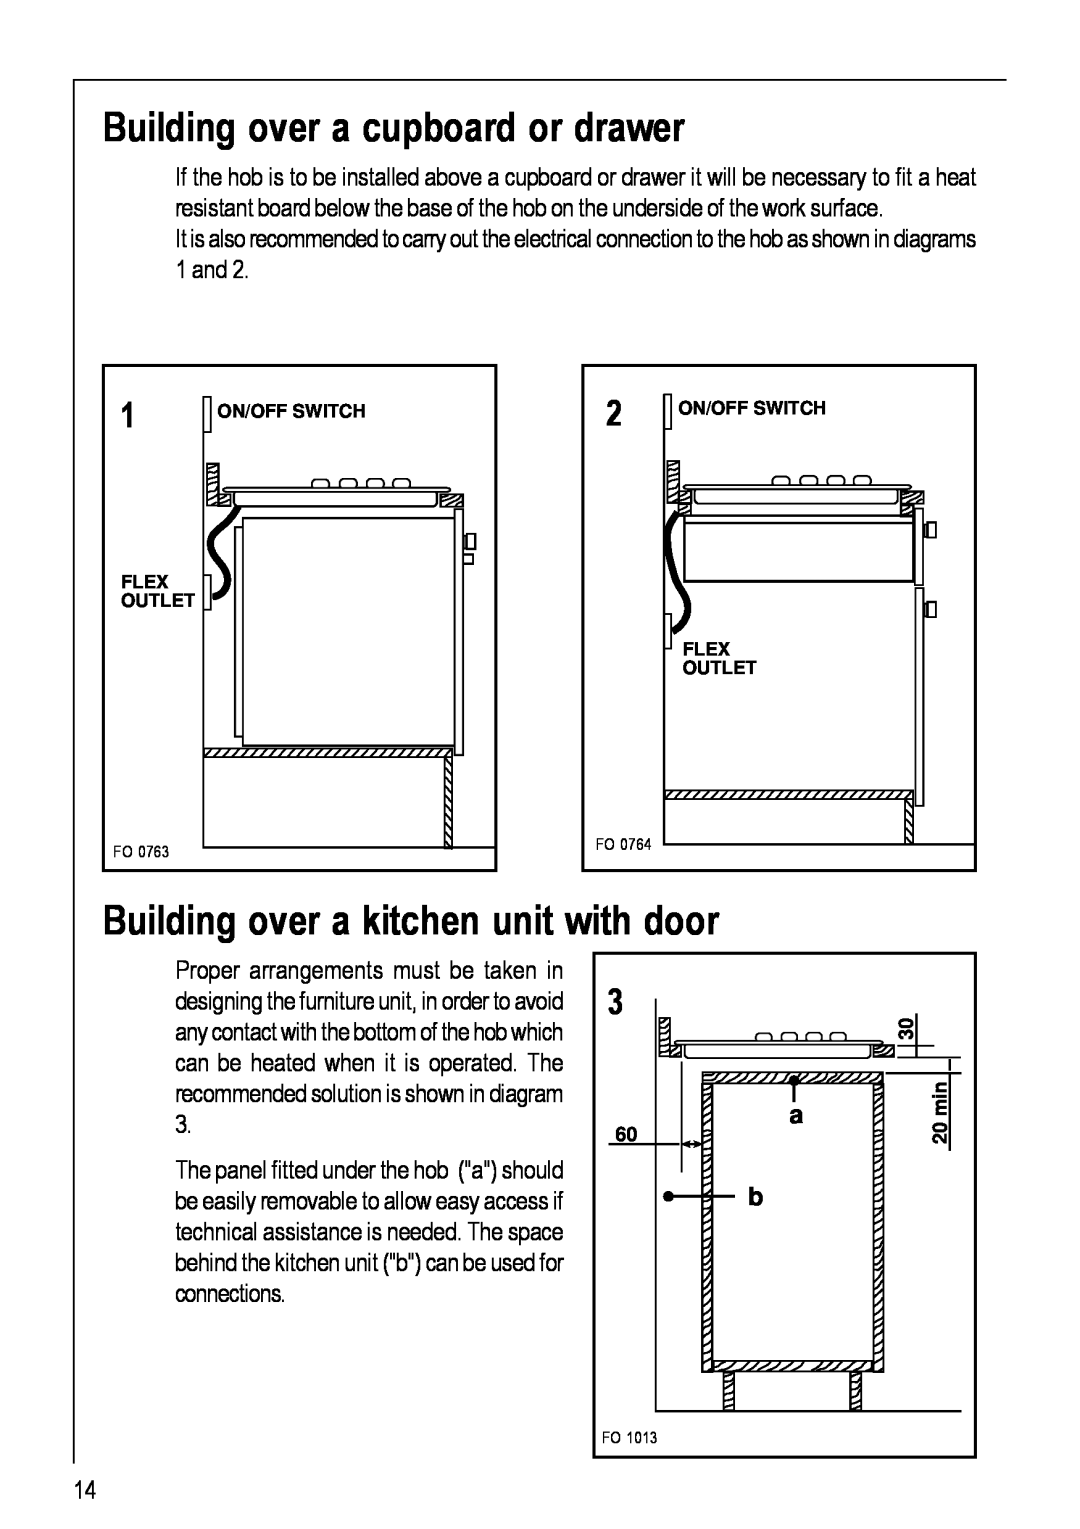 Electrolux 111 K operating instructions Building over a cupboard or drawer, Building over a kitchen unit with door 